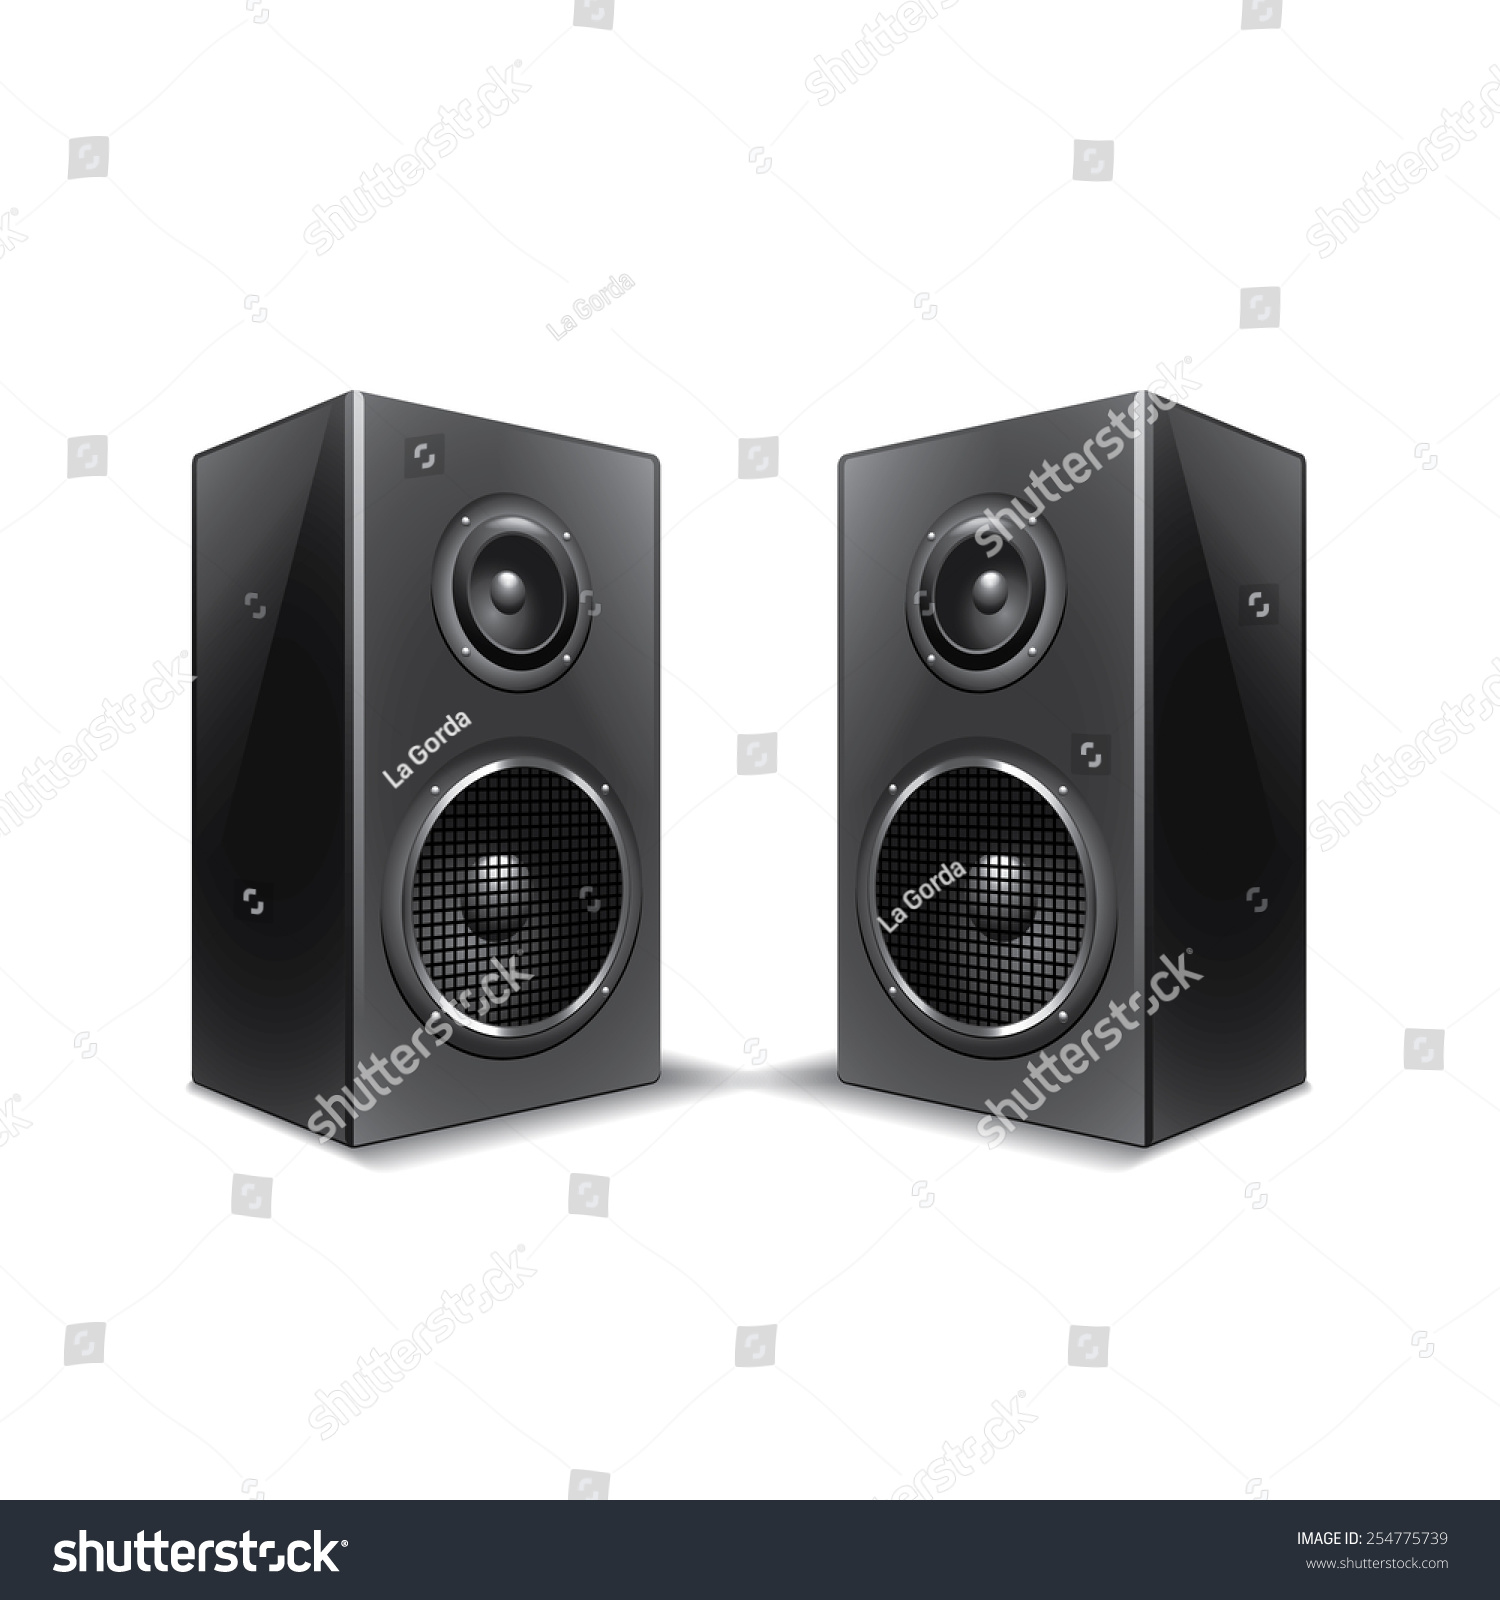 Speakers isolated on white photo-realistic vector illustration #254775739